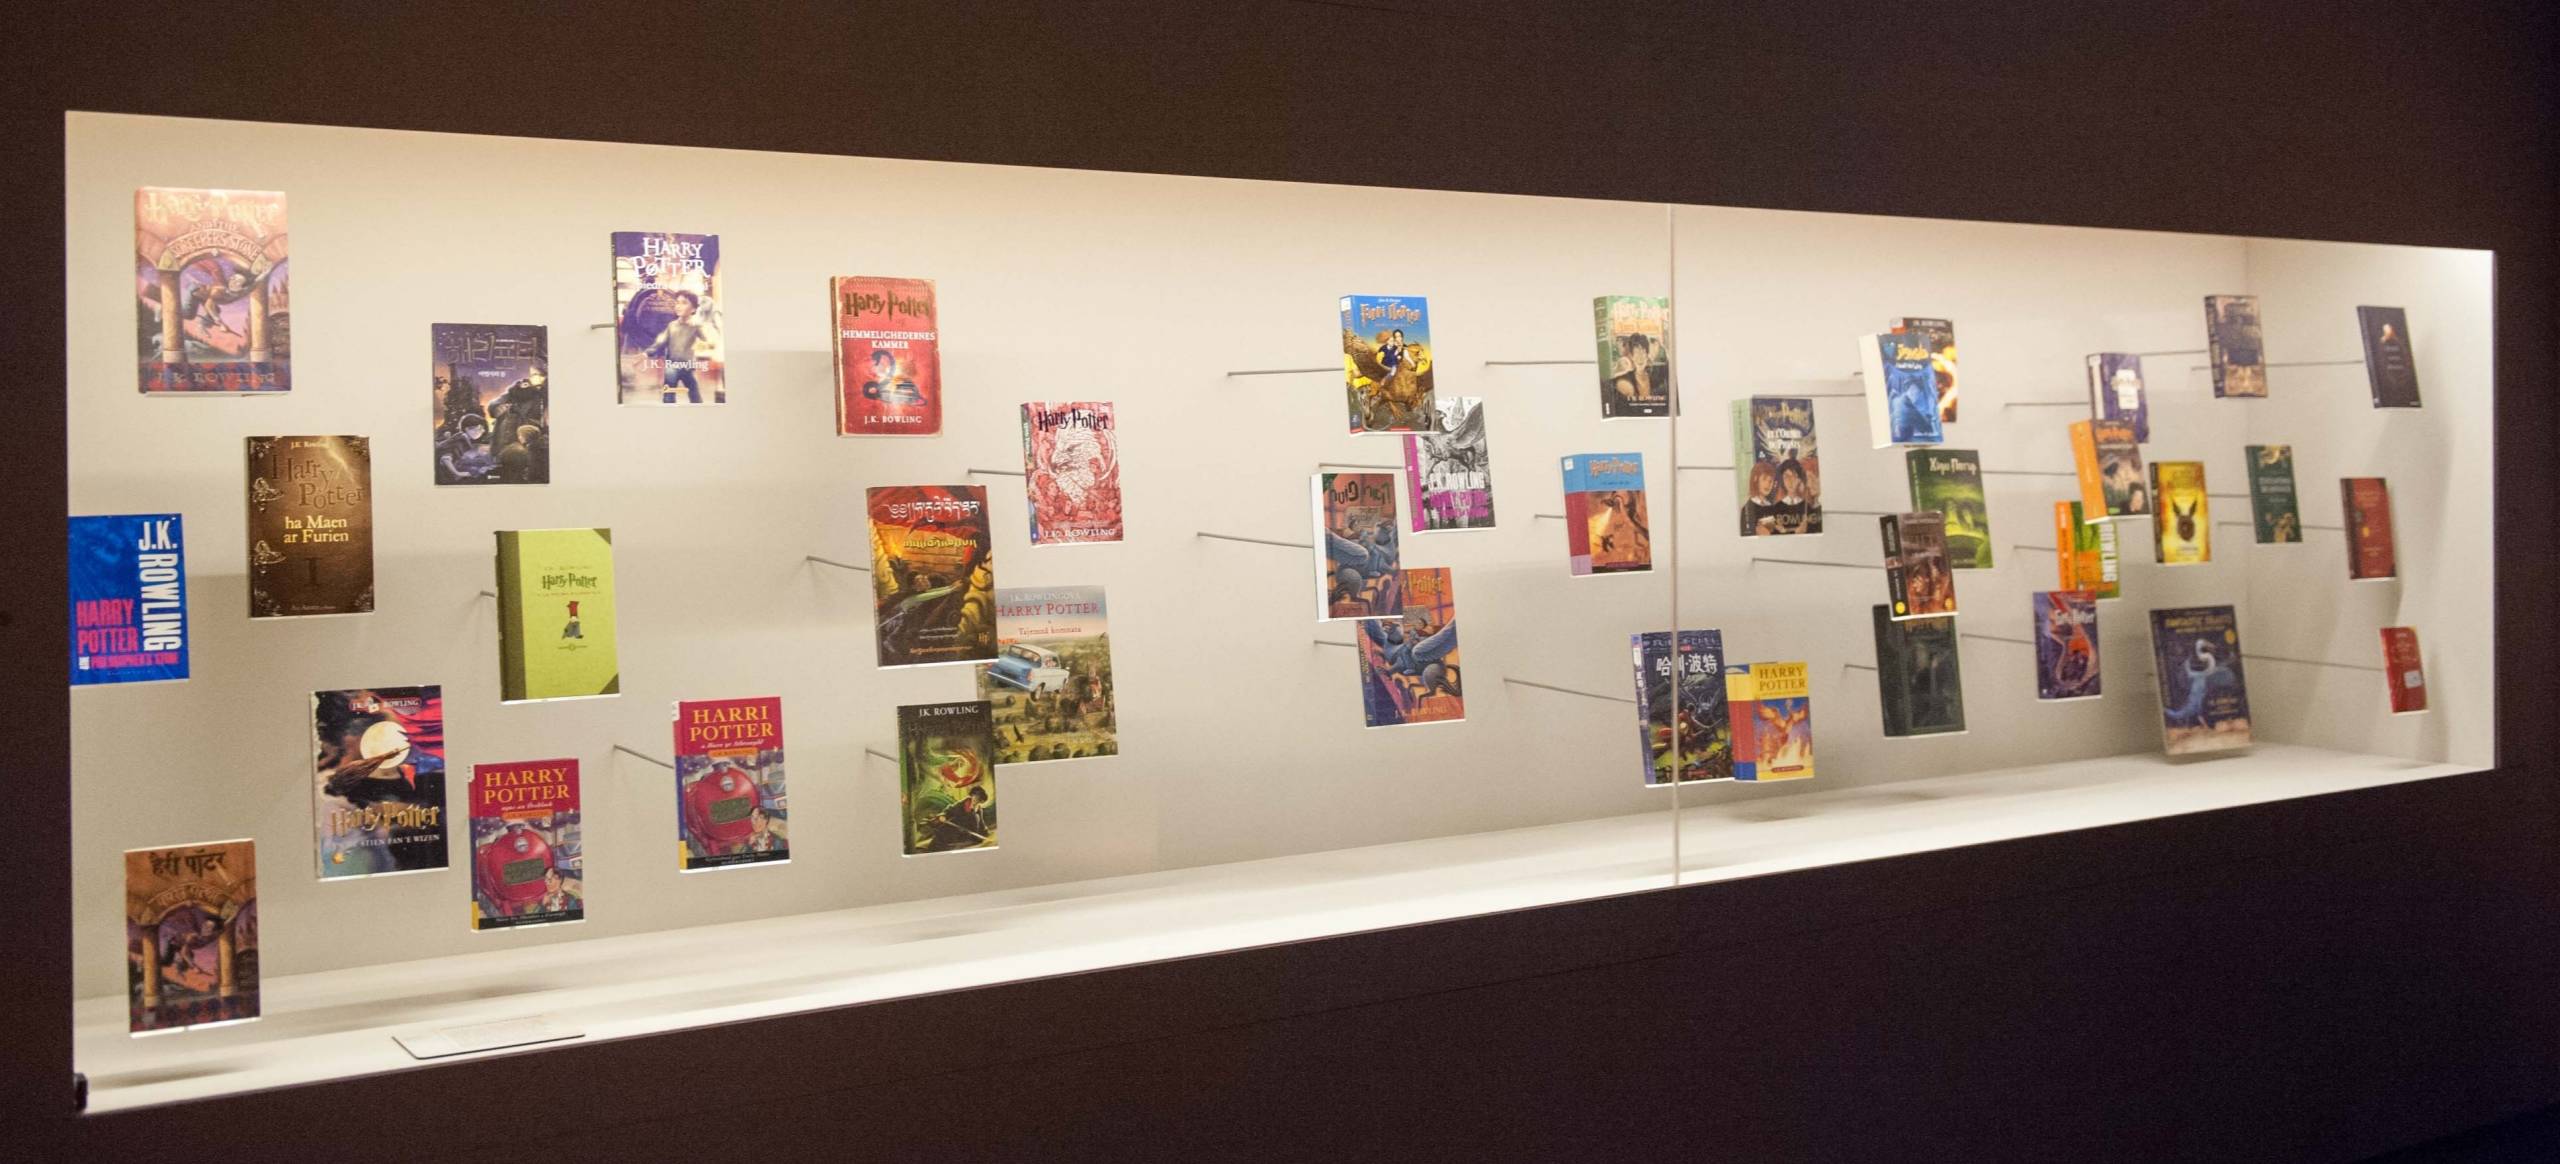 Collection of Harry Potter books from the British Library exhibition, A History of Magic